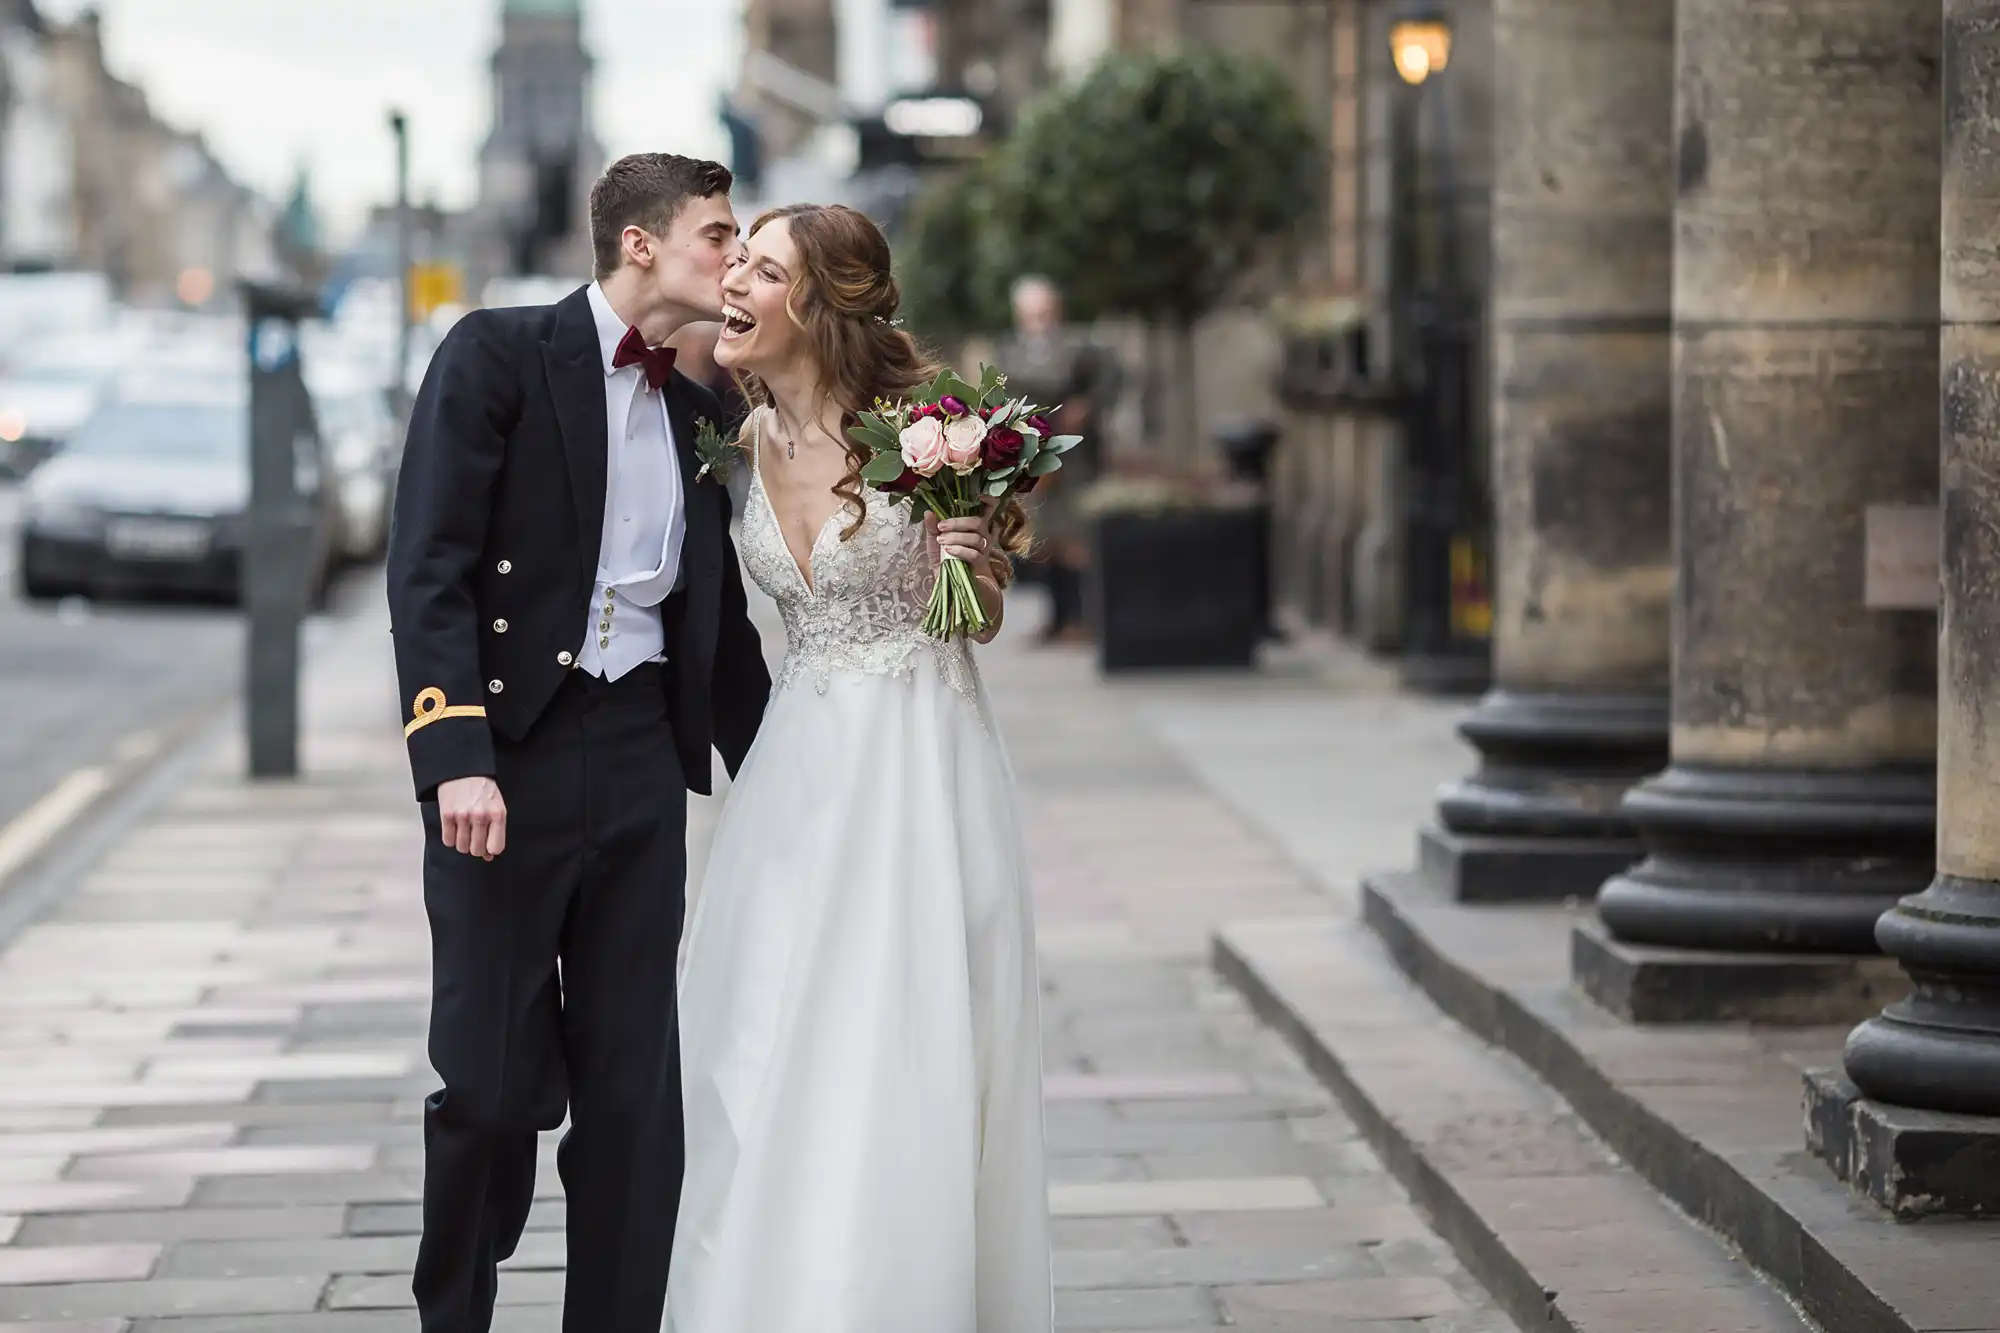 A bride and groom in formal attire walk on a city sidewalk; the groom kisses the bride on the forehead while she holds a bouquet and smiles.